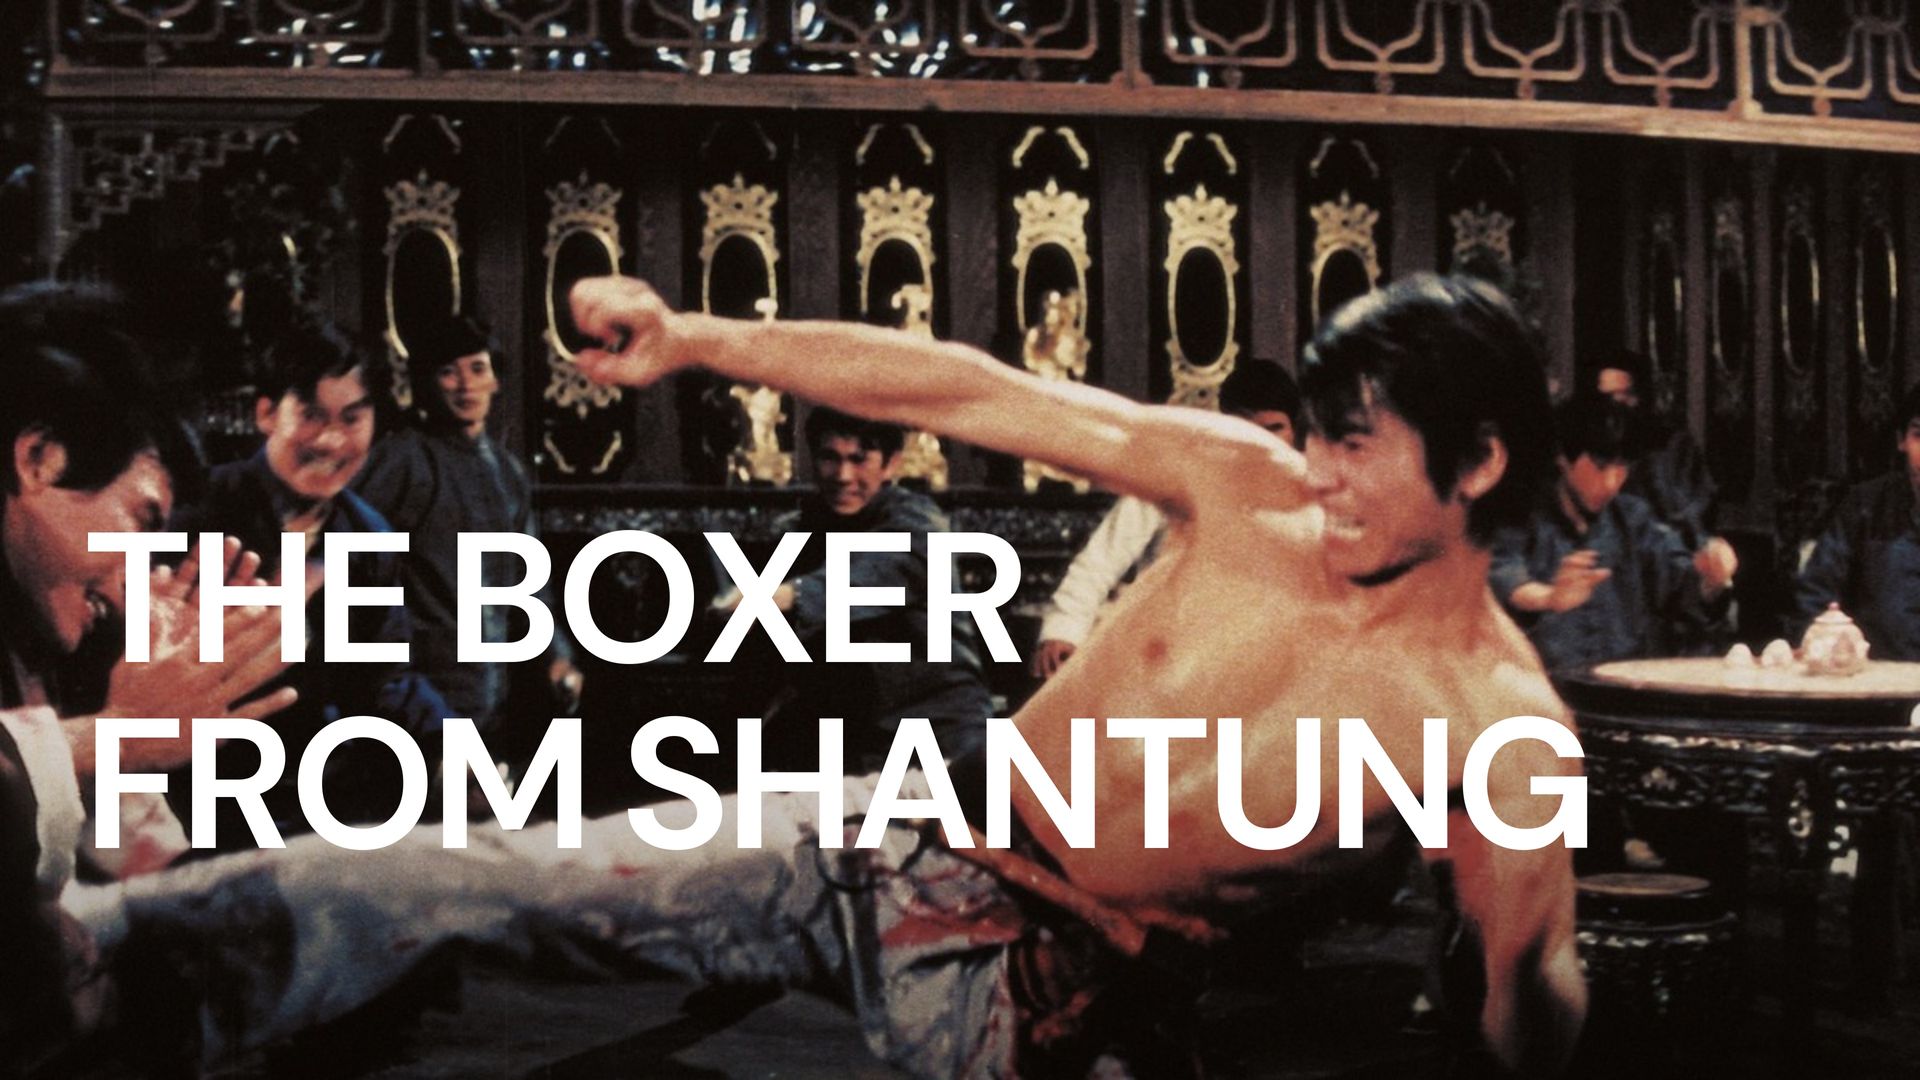 The Boxer from Shantung Backdrop